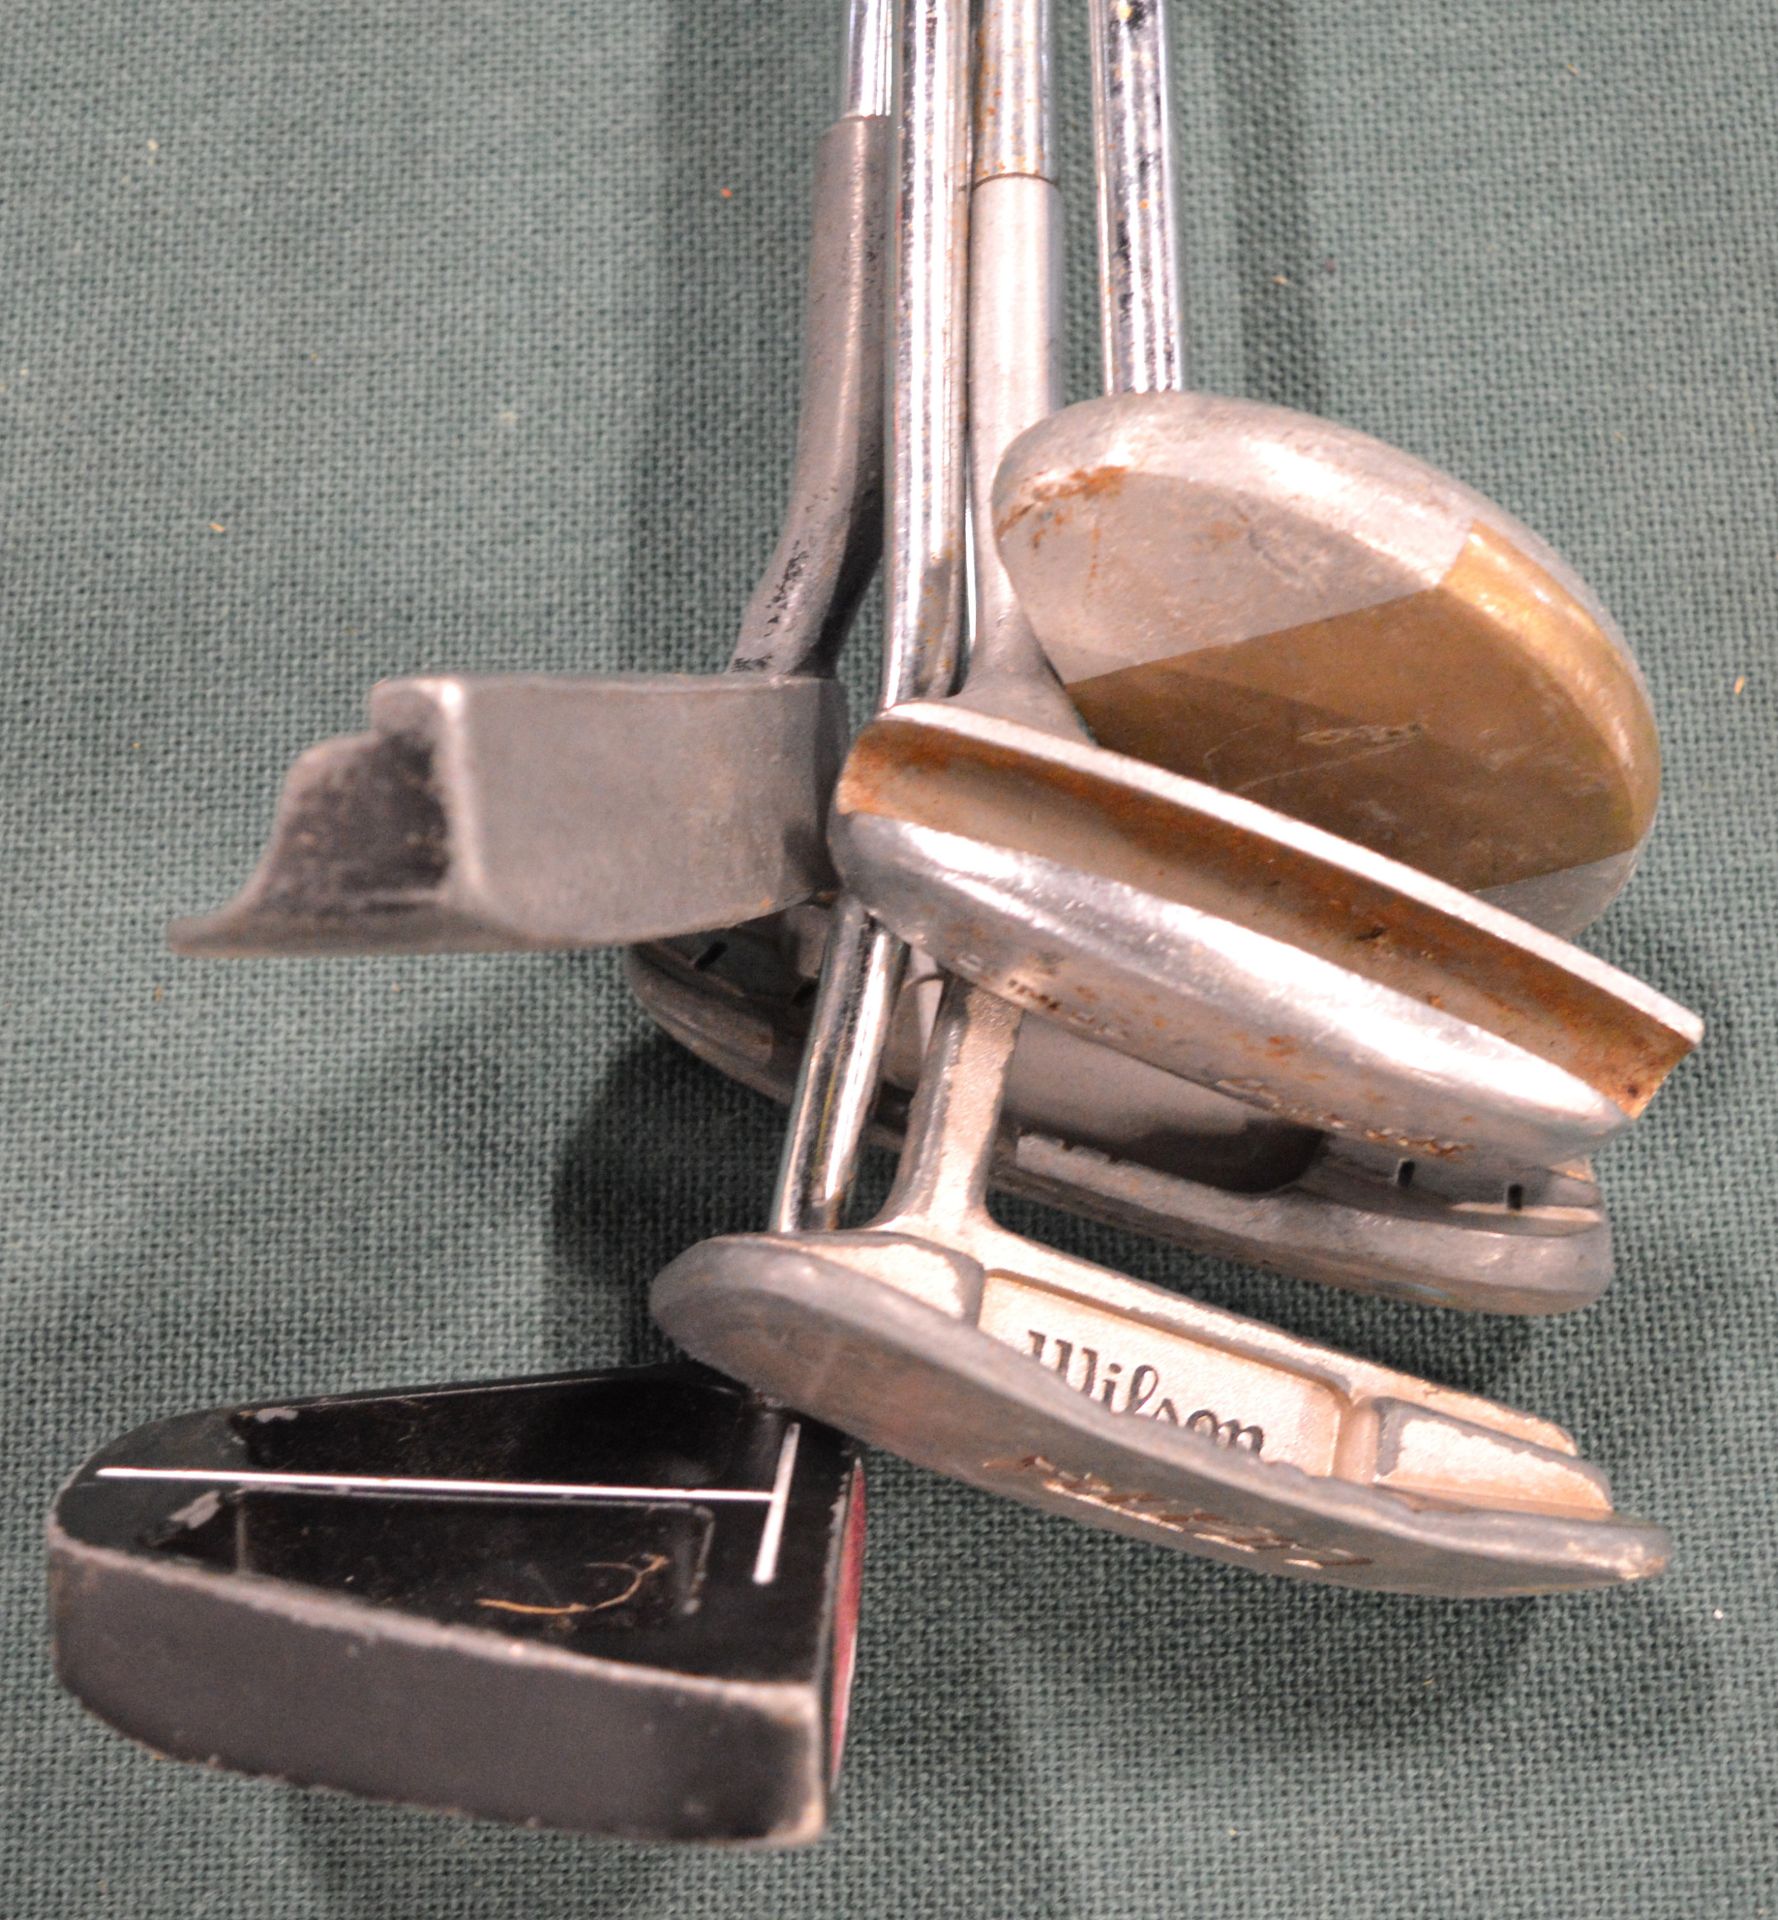 6x Golf Clubs - Putters. - Image 2 of 2